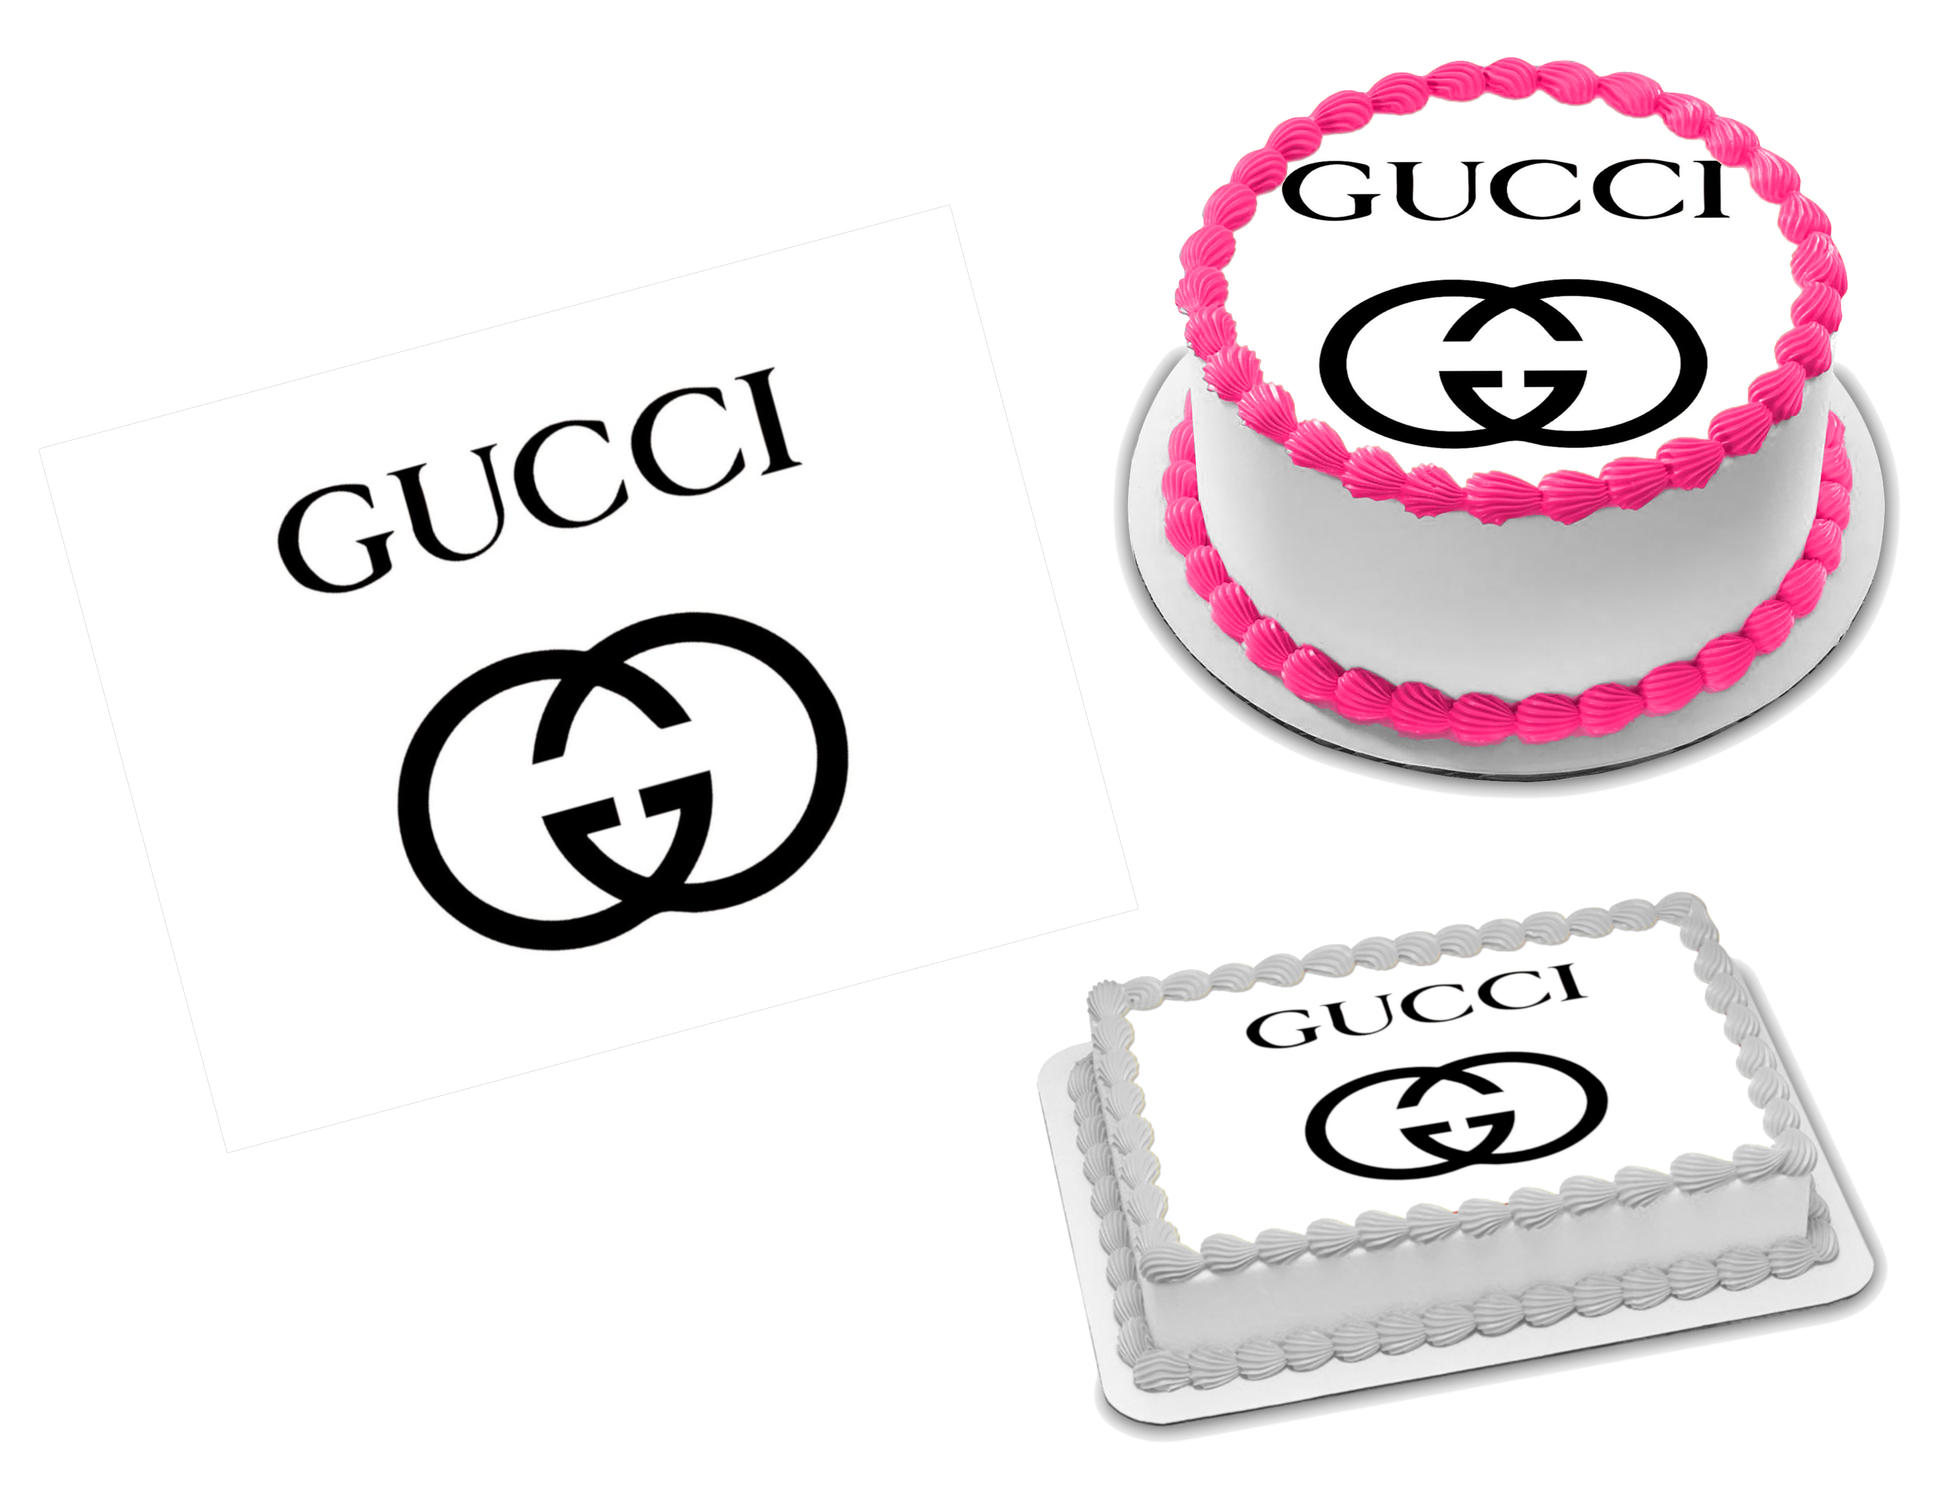 Gucci Authenticity Certificate Card & Envelope Only